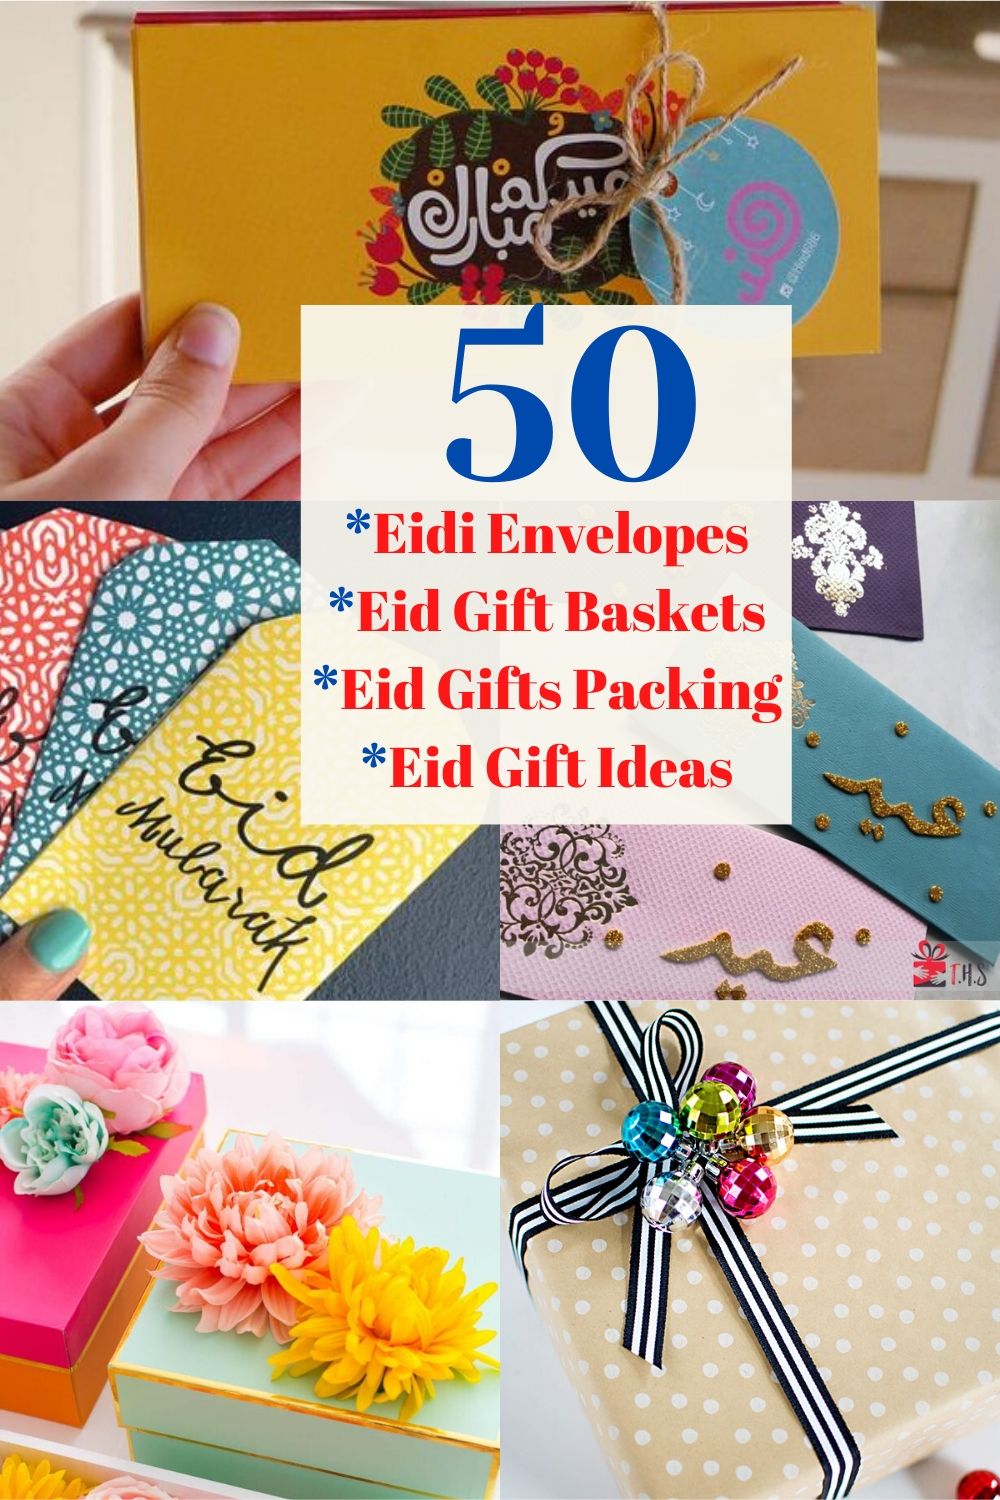 Ideas for Wrapping Presents at this Eid ul Fitar 2020 - Eidi envelopes ideas - Eidi gift baskets - Eid gifts wrapping